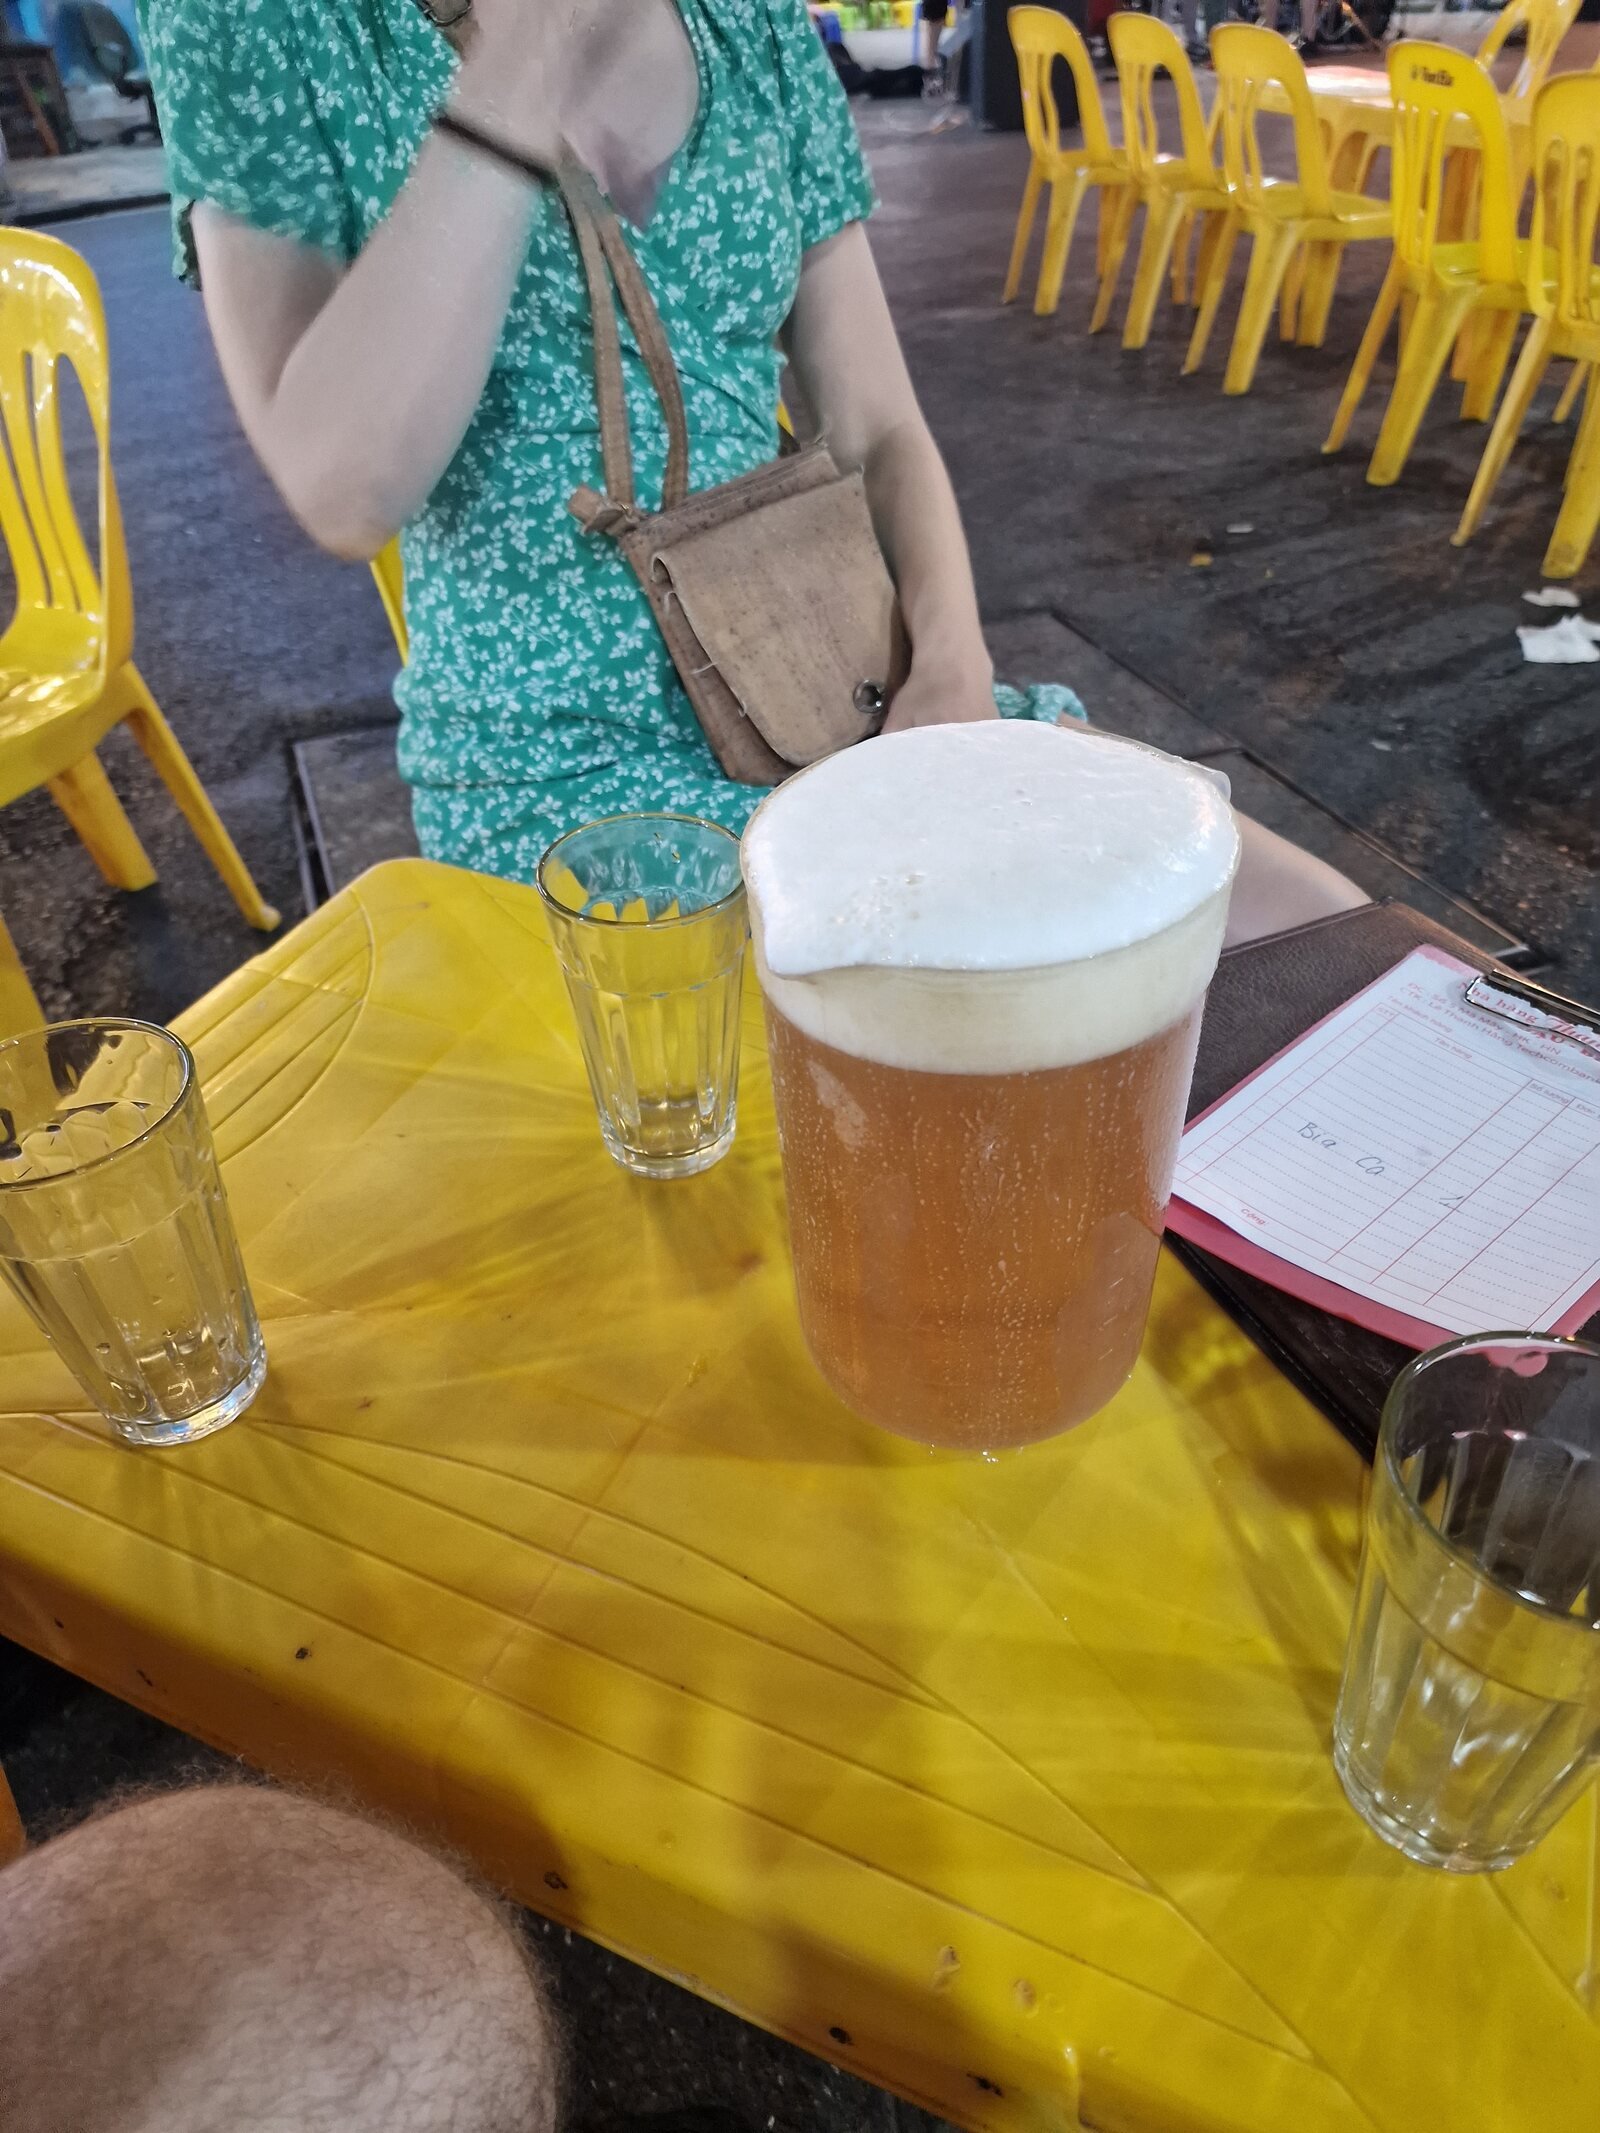 a large jug of beer on a tiny yellow plastic table